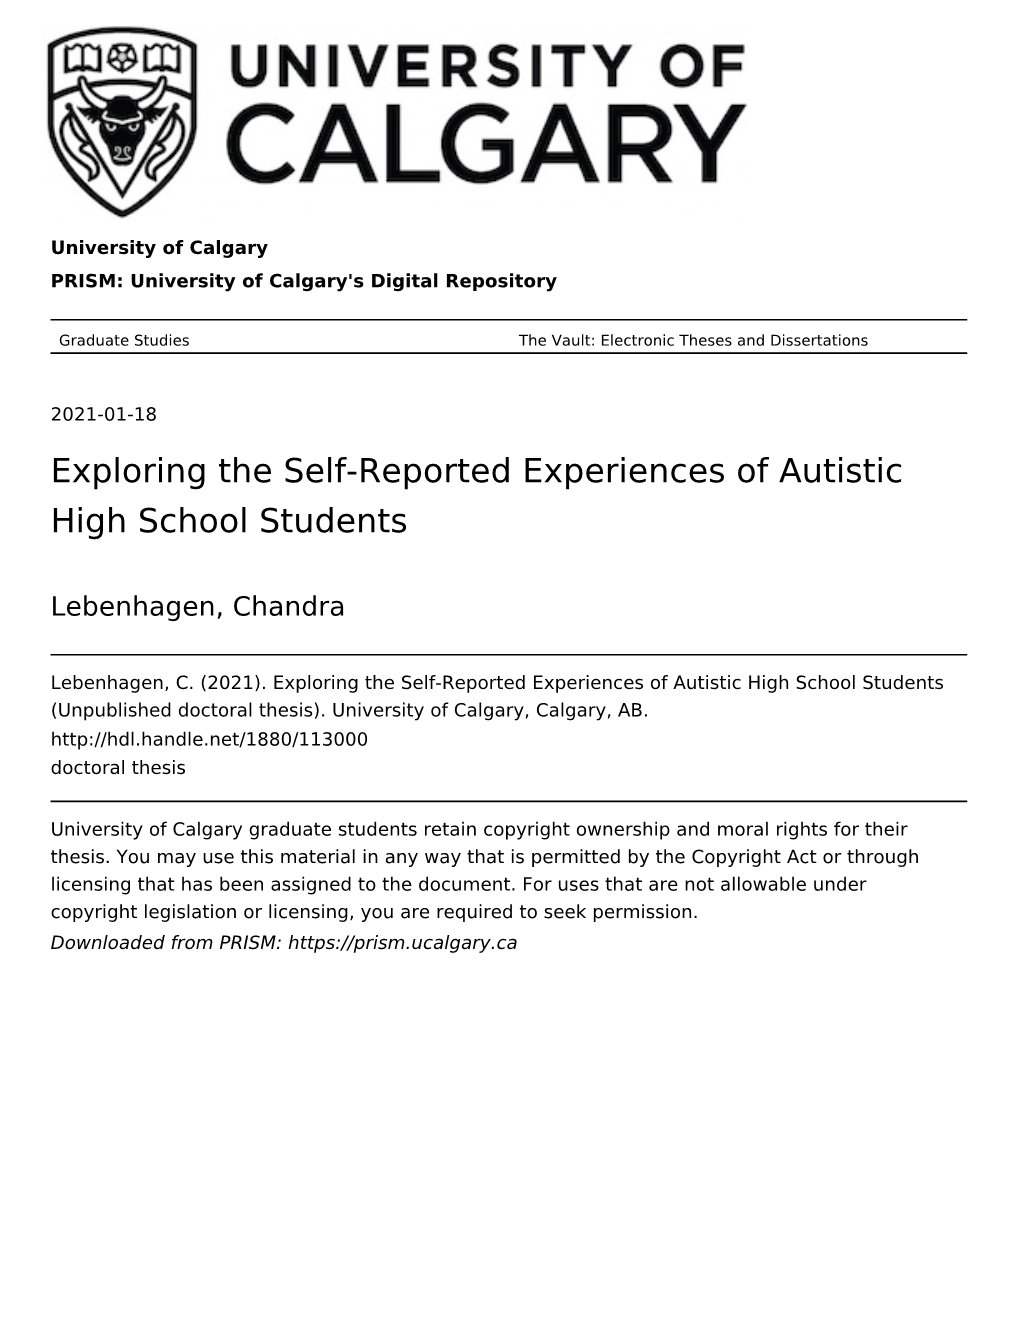 Exploring the Self-Reported Experiences of Autistic High School Students